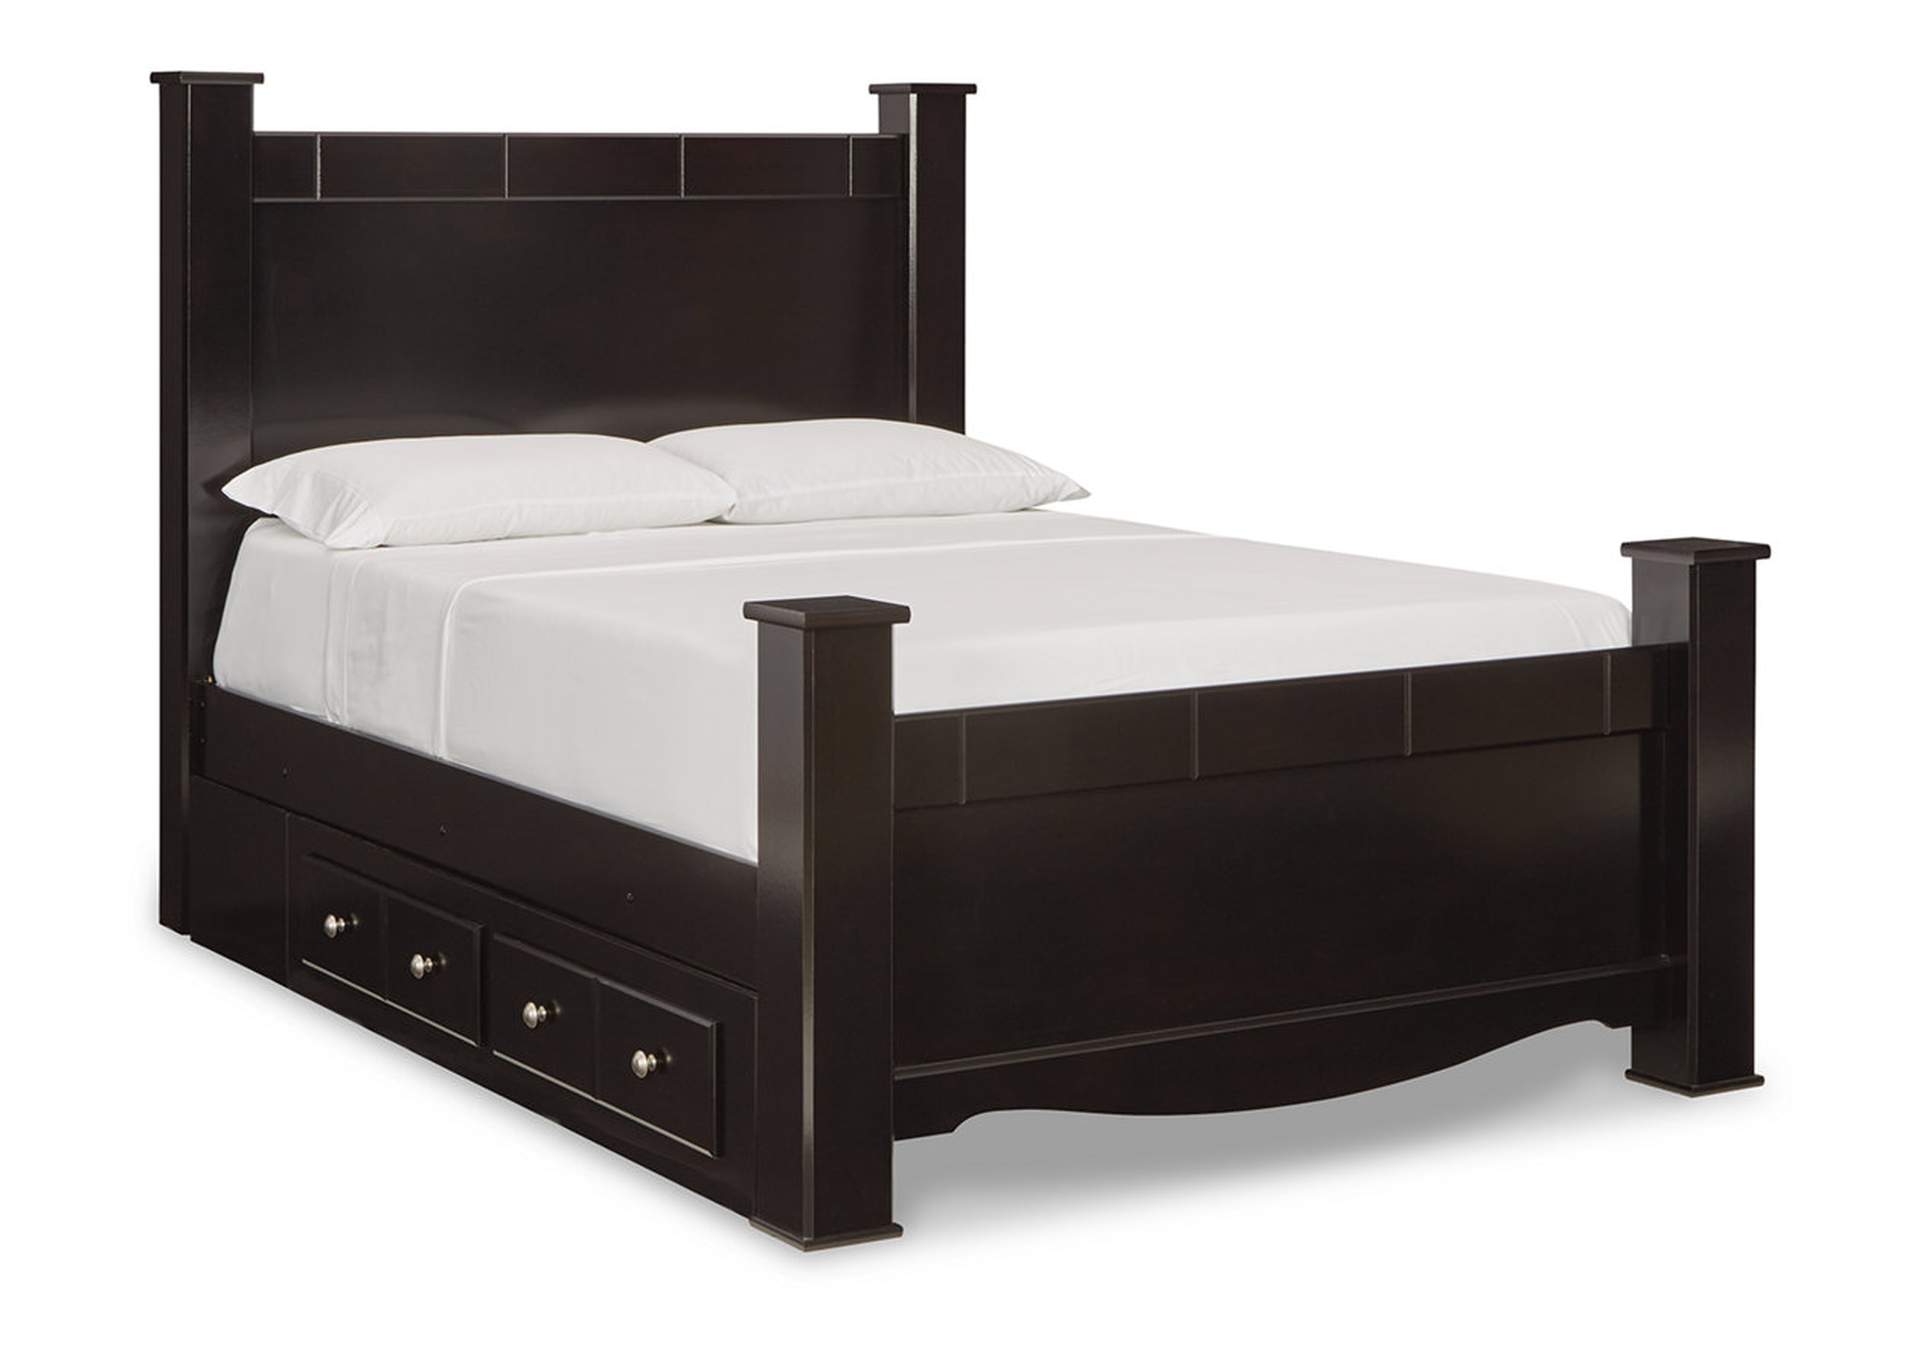 Mirlotown Queen Poster Bed With Storage, Bed With Storage Name